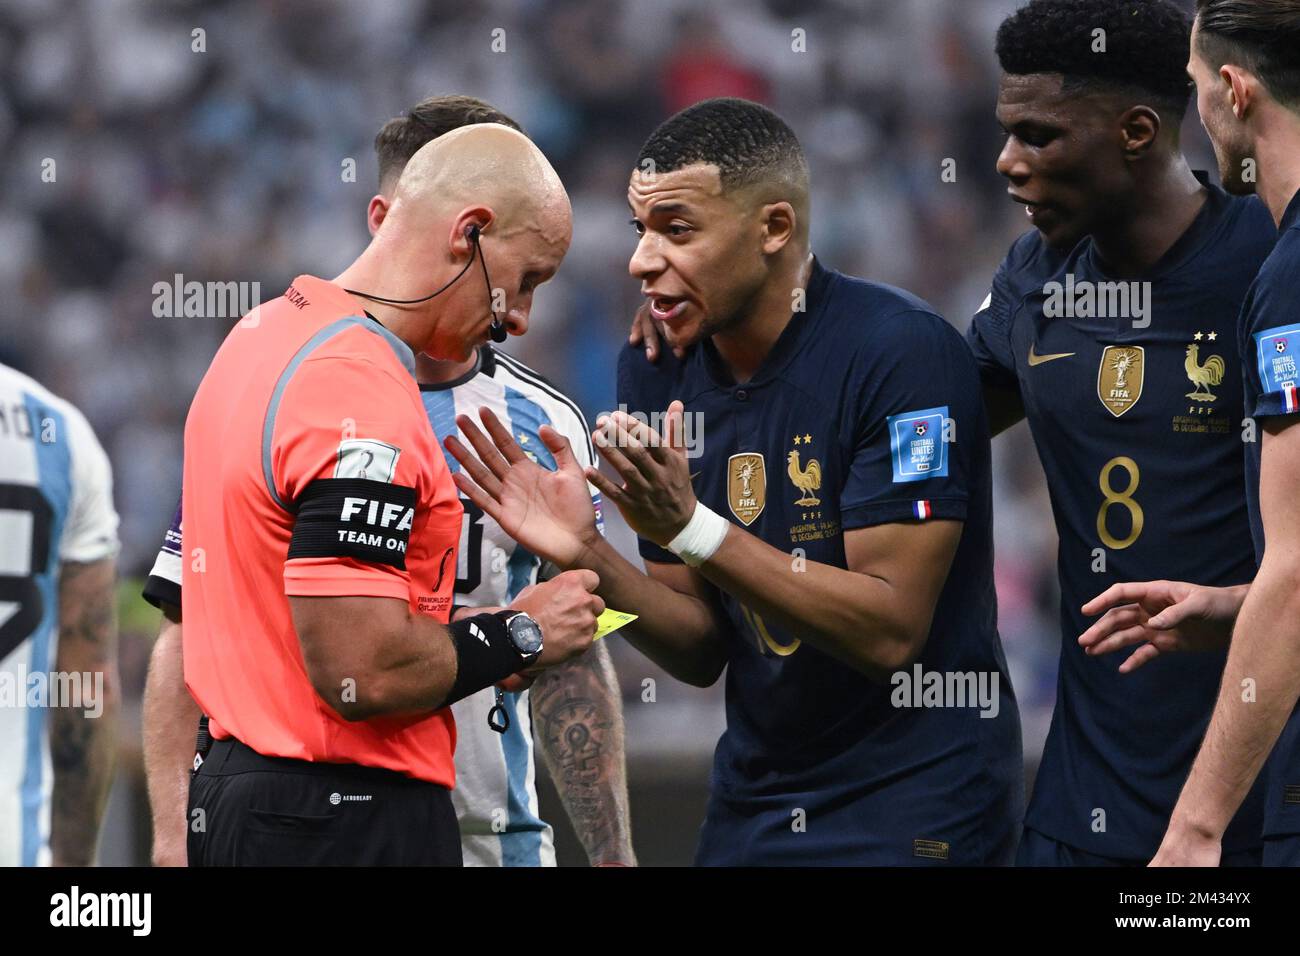 Lusaier, Qatar. 18th Dec, 2022. Kylian Mbappe (3rd R) of France talks to Referee Szymon Marciniak during the Final between Argentina and France at the 2022 FIFA World Cup at Lusail Stadium in Lusail, Qatar, Dec. 18, 2022. Credit: Li Ga/Xinhua/Alamy Live News/Alamy Live News Stock Photo